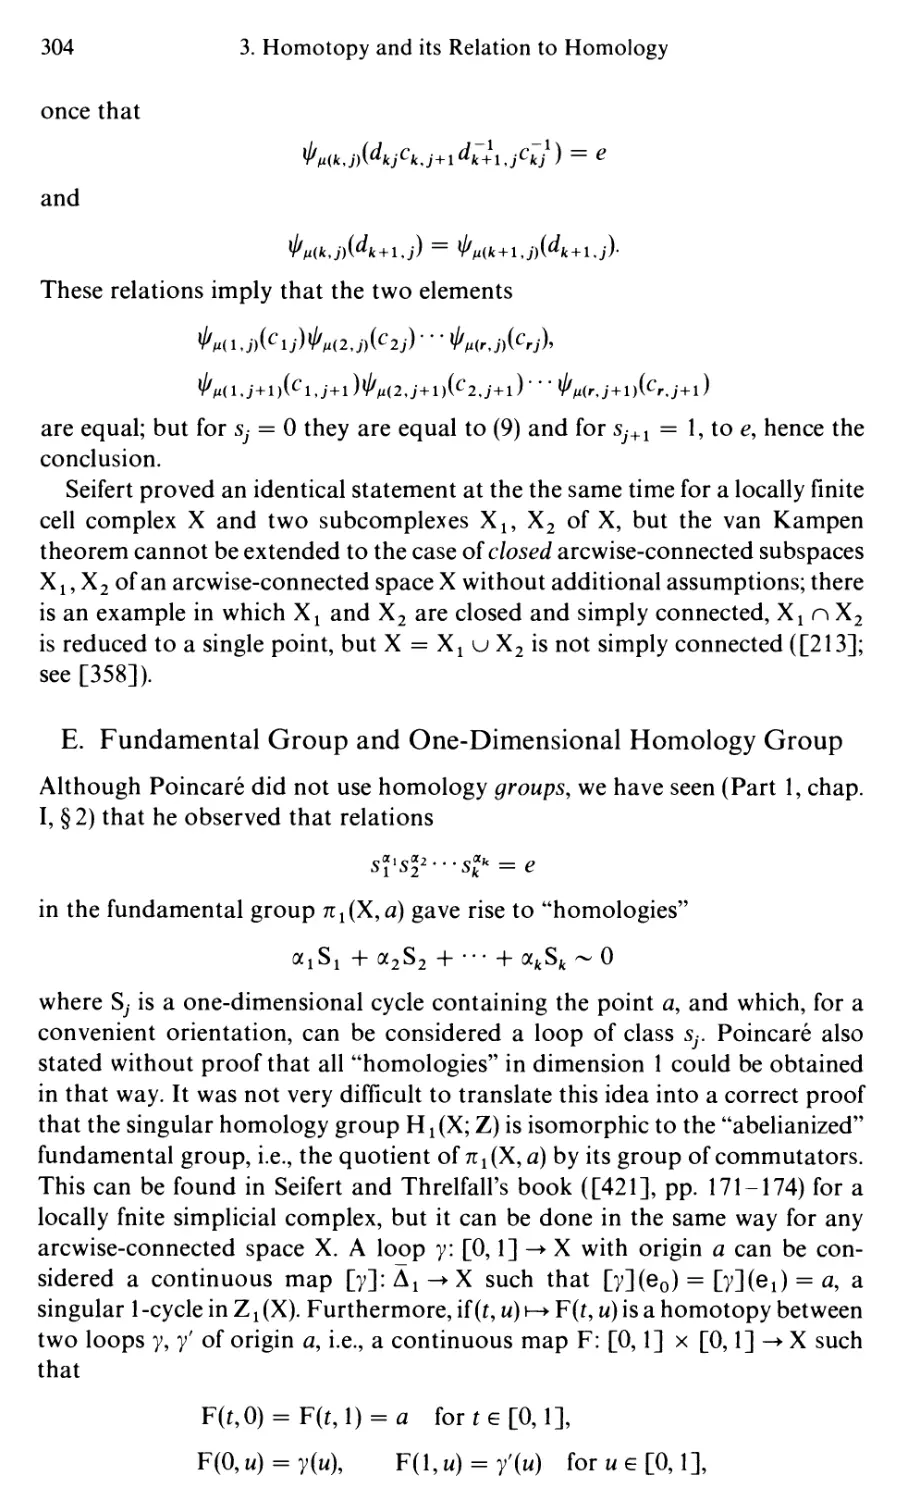 E. Fundamental Group and One-Dimensional Homology Group